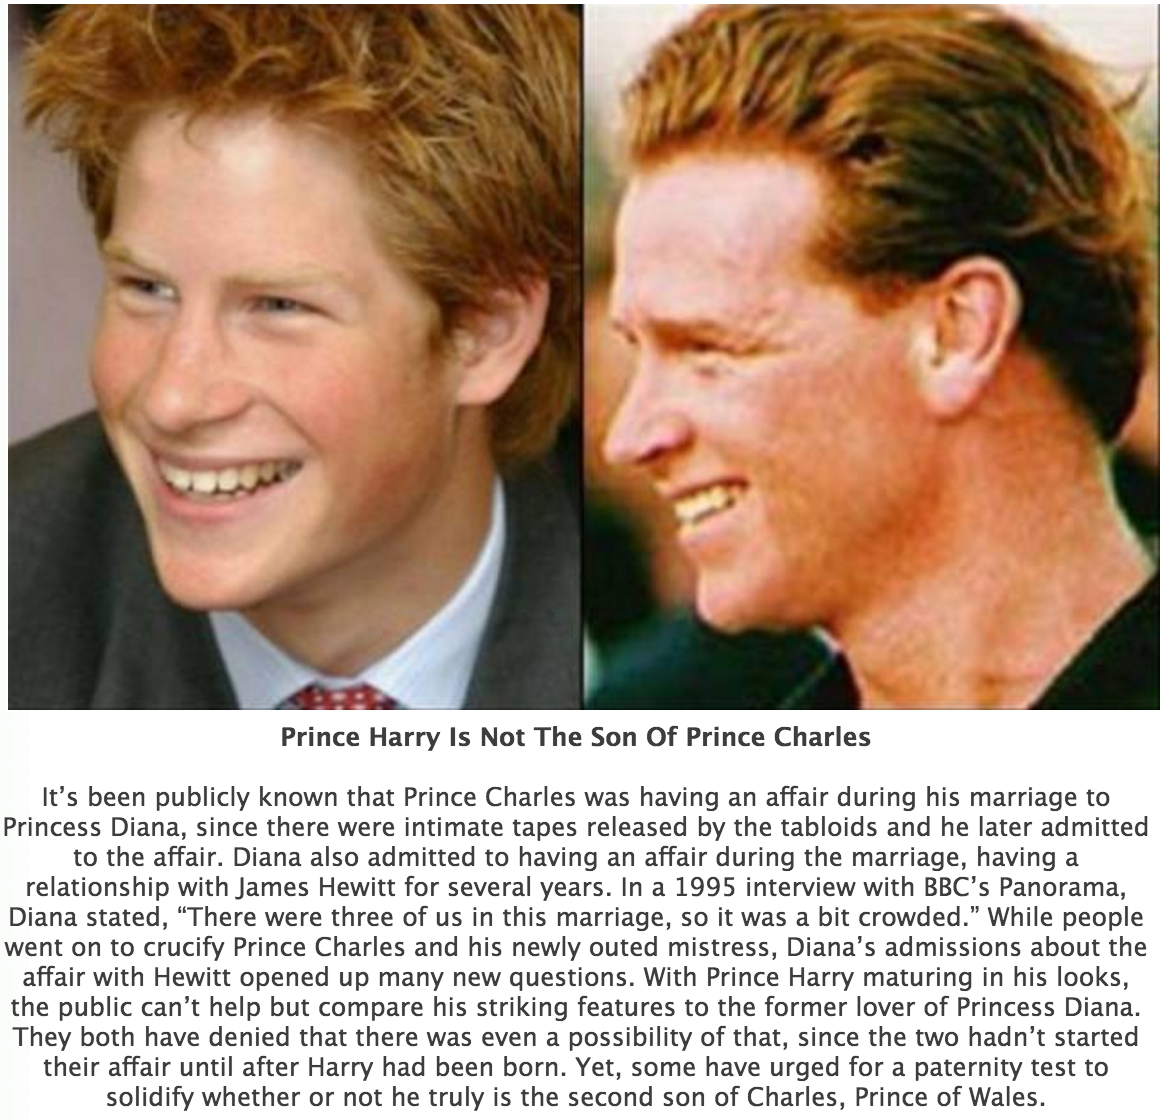 dianas affairs - Prince Harry Is Not The Son Of Prince Charles It's been publicly known that Prince Charles was having an affair during his marriage to Princess Diana, since there were intimate tapes released by the tabloids and he later admitted to the a